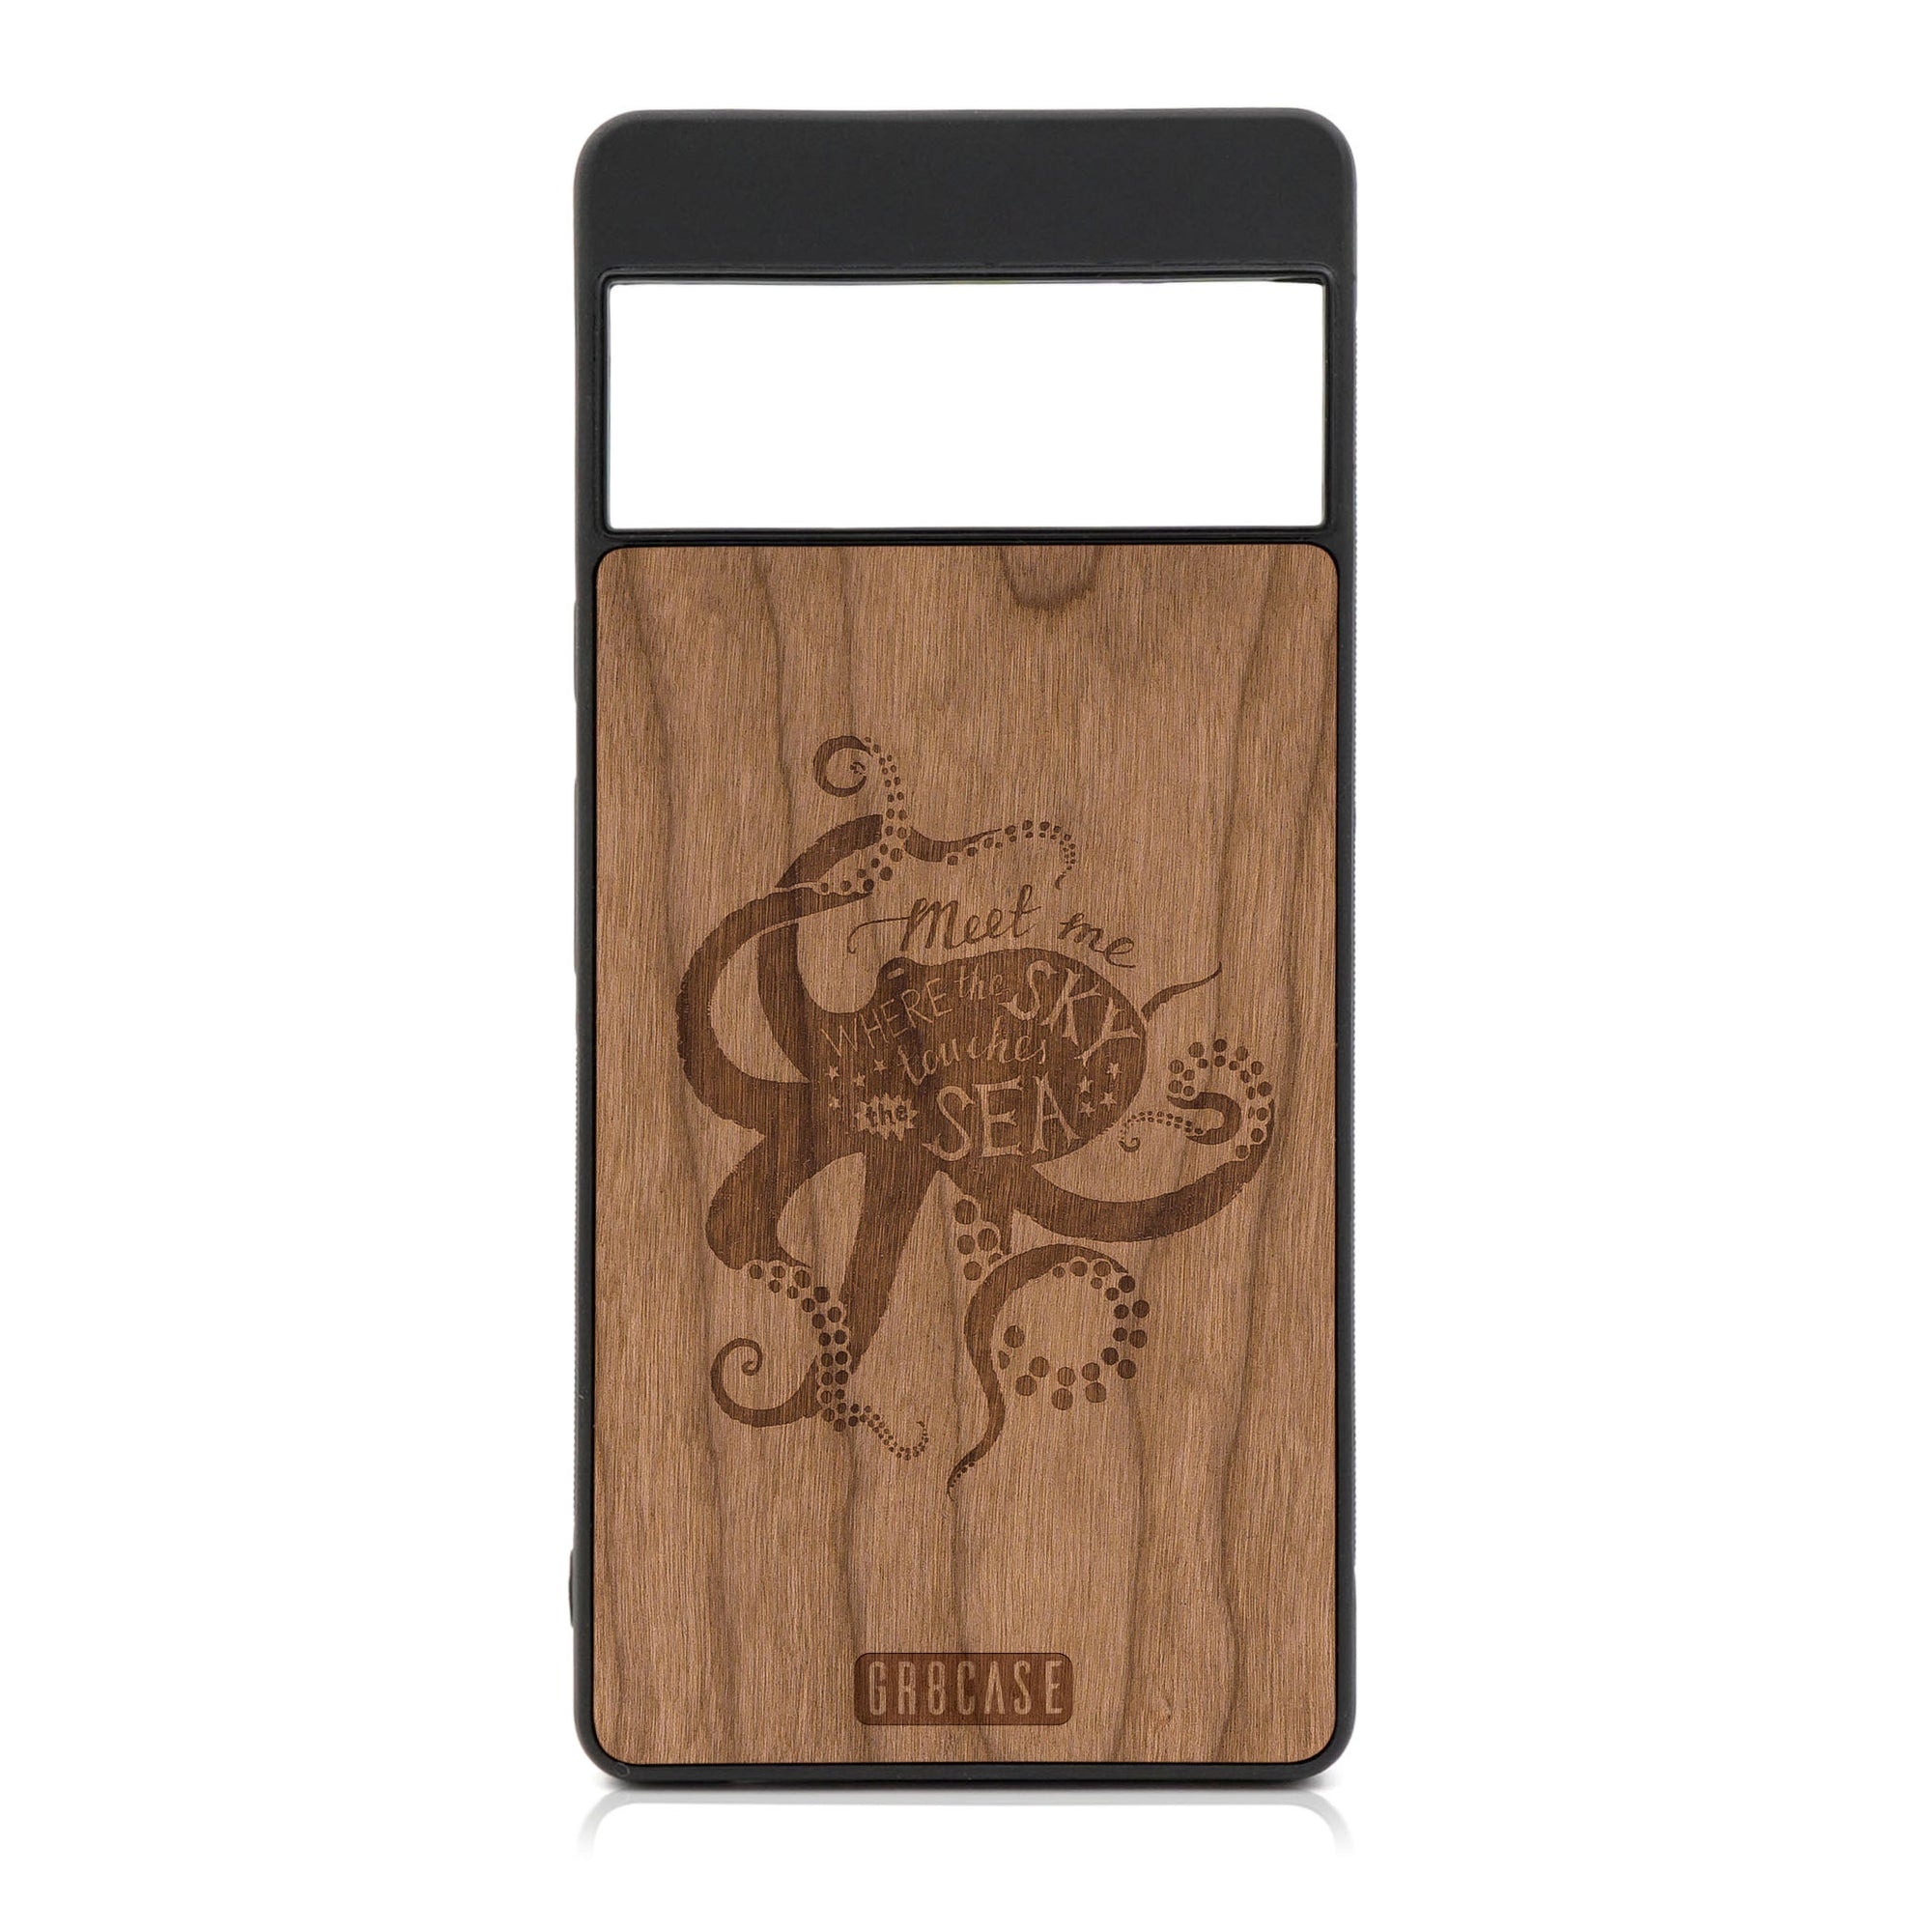 Meet Me Where The Sky Touches The Sea (Octopus) Design Wood Case For Google Pixel 6